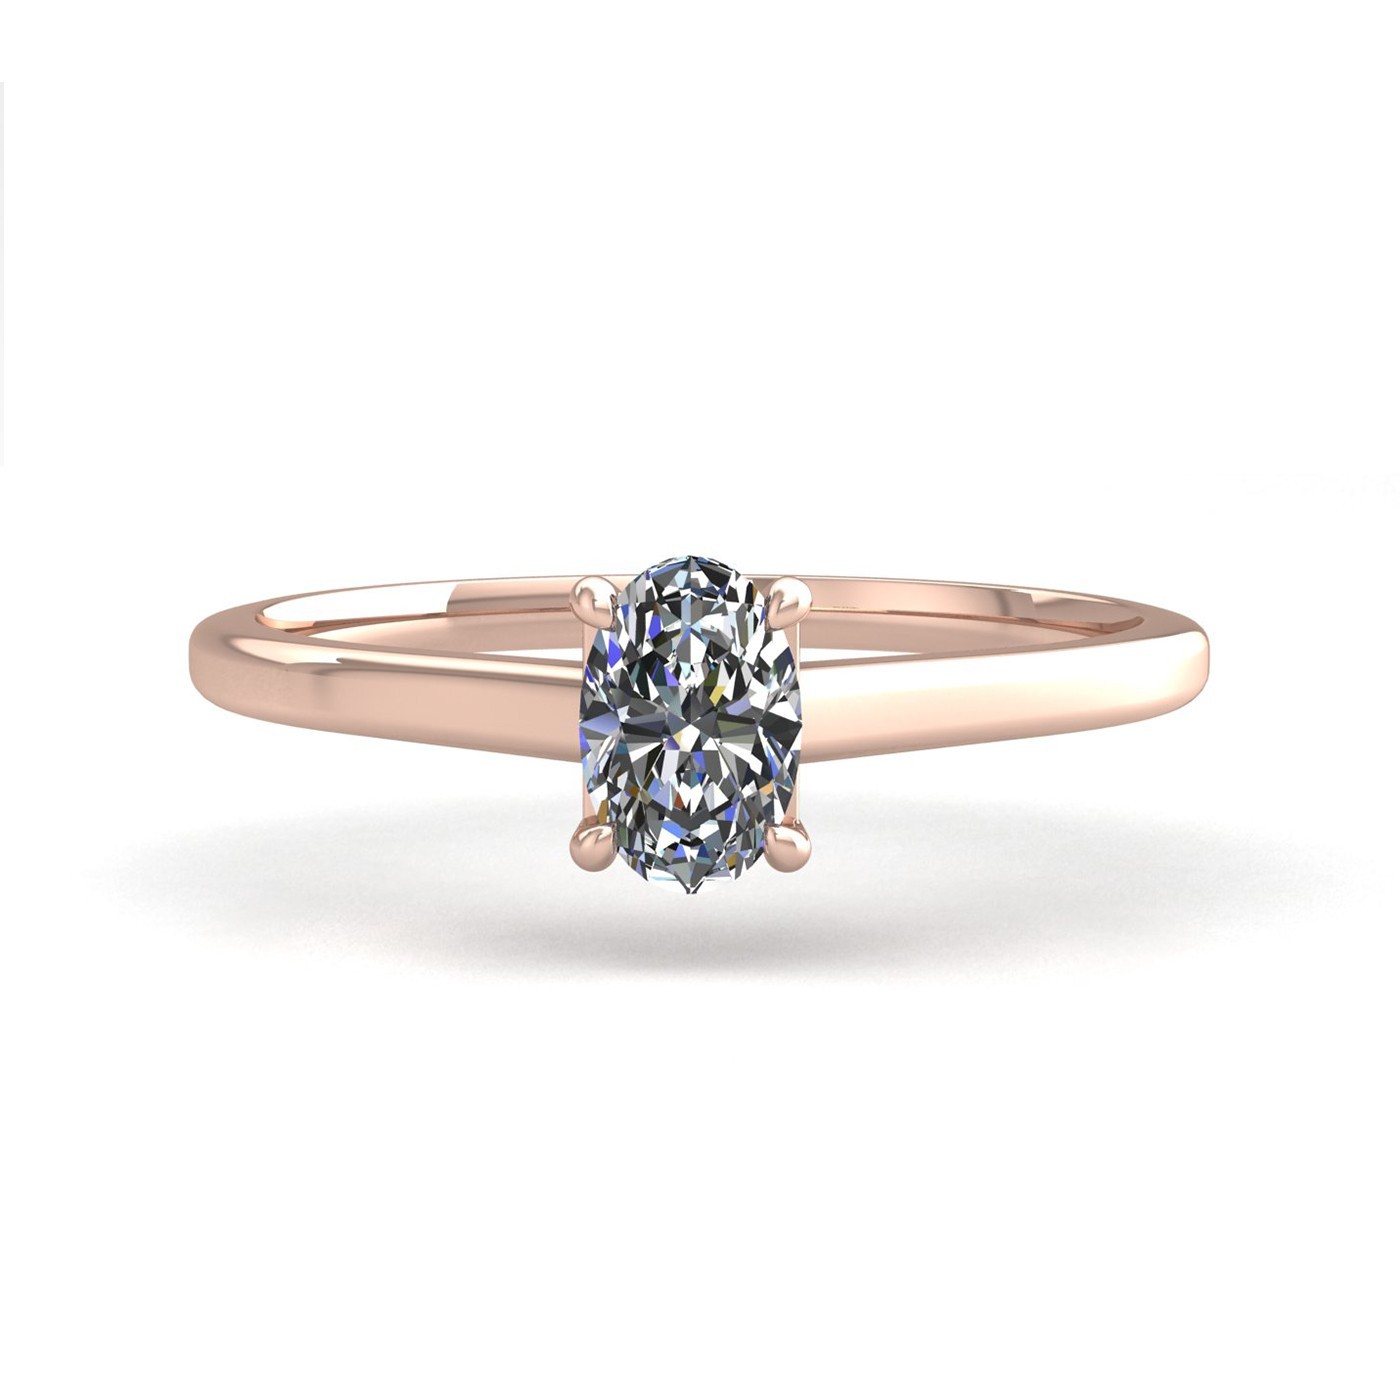 18k rose gold  0,80 ct 4 prongs solitaire oval cut diamond engagement ring with whisper thin band Photos & images